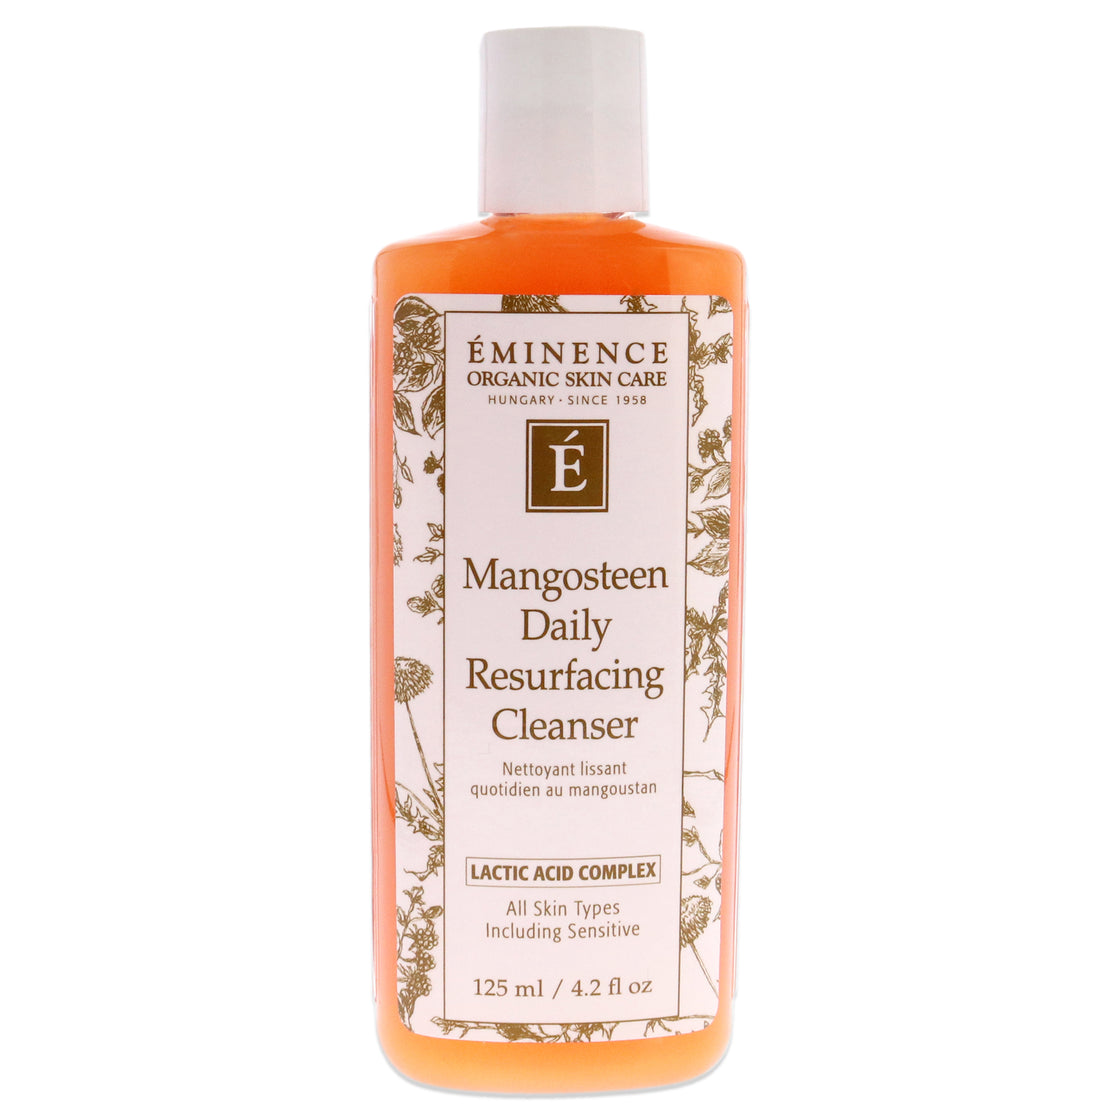 Mangosteen Daily Resurfacing Cleanser by Eminence for Unisex - 4.2 oz Cleanser